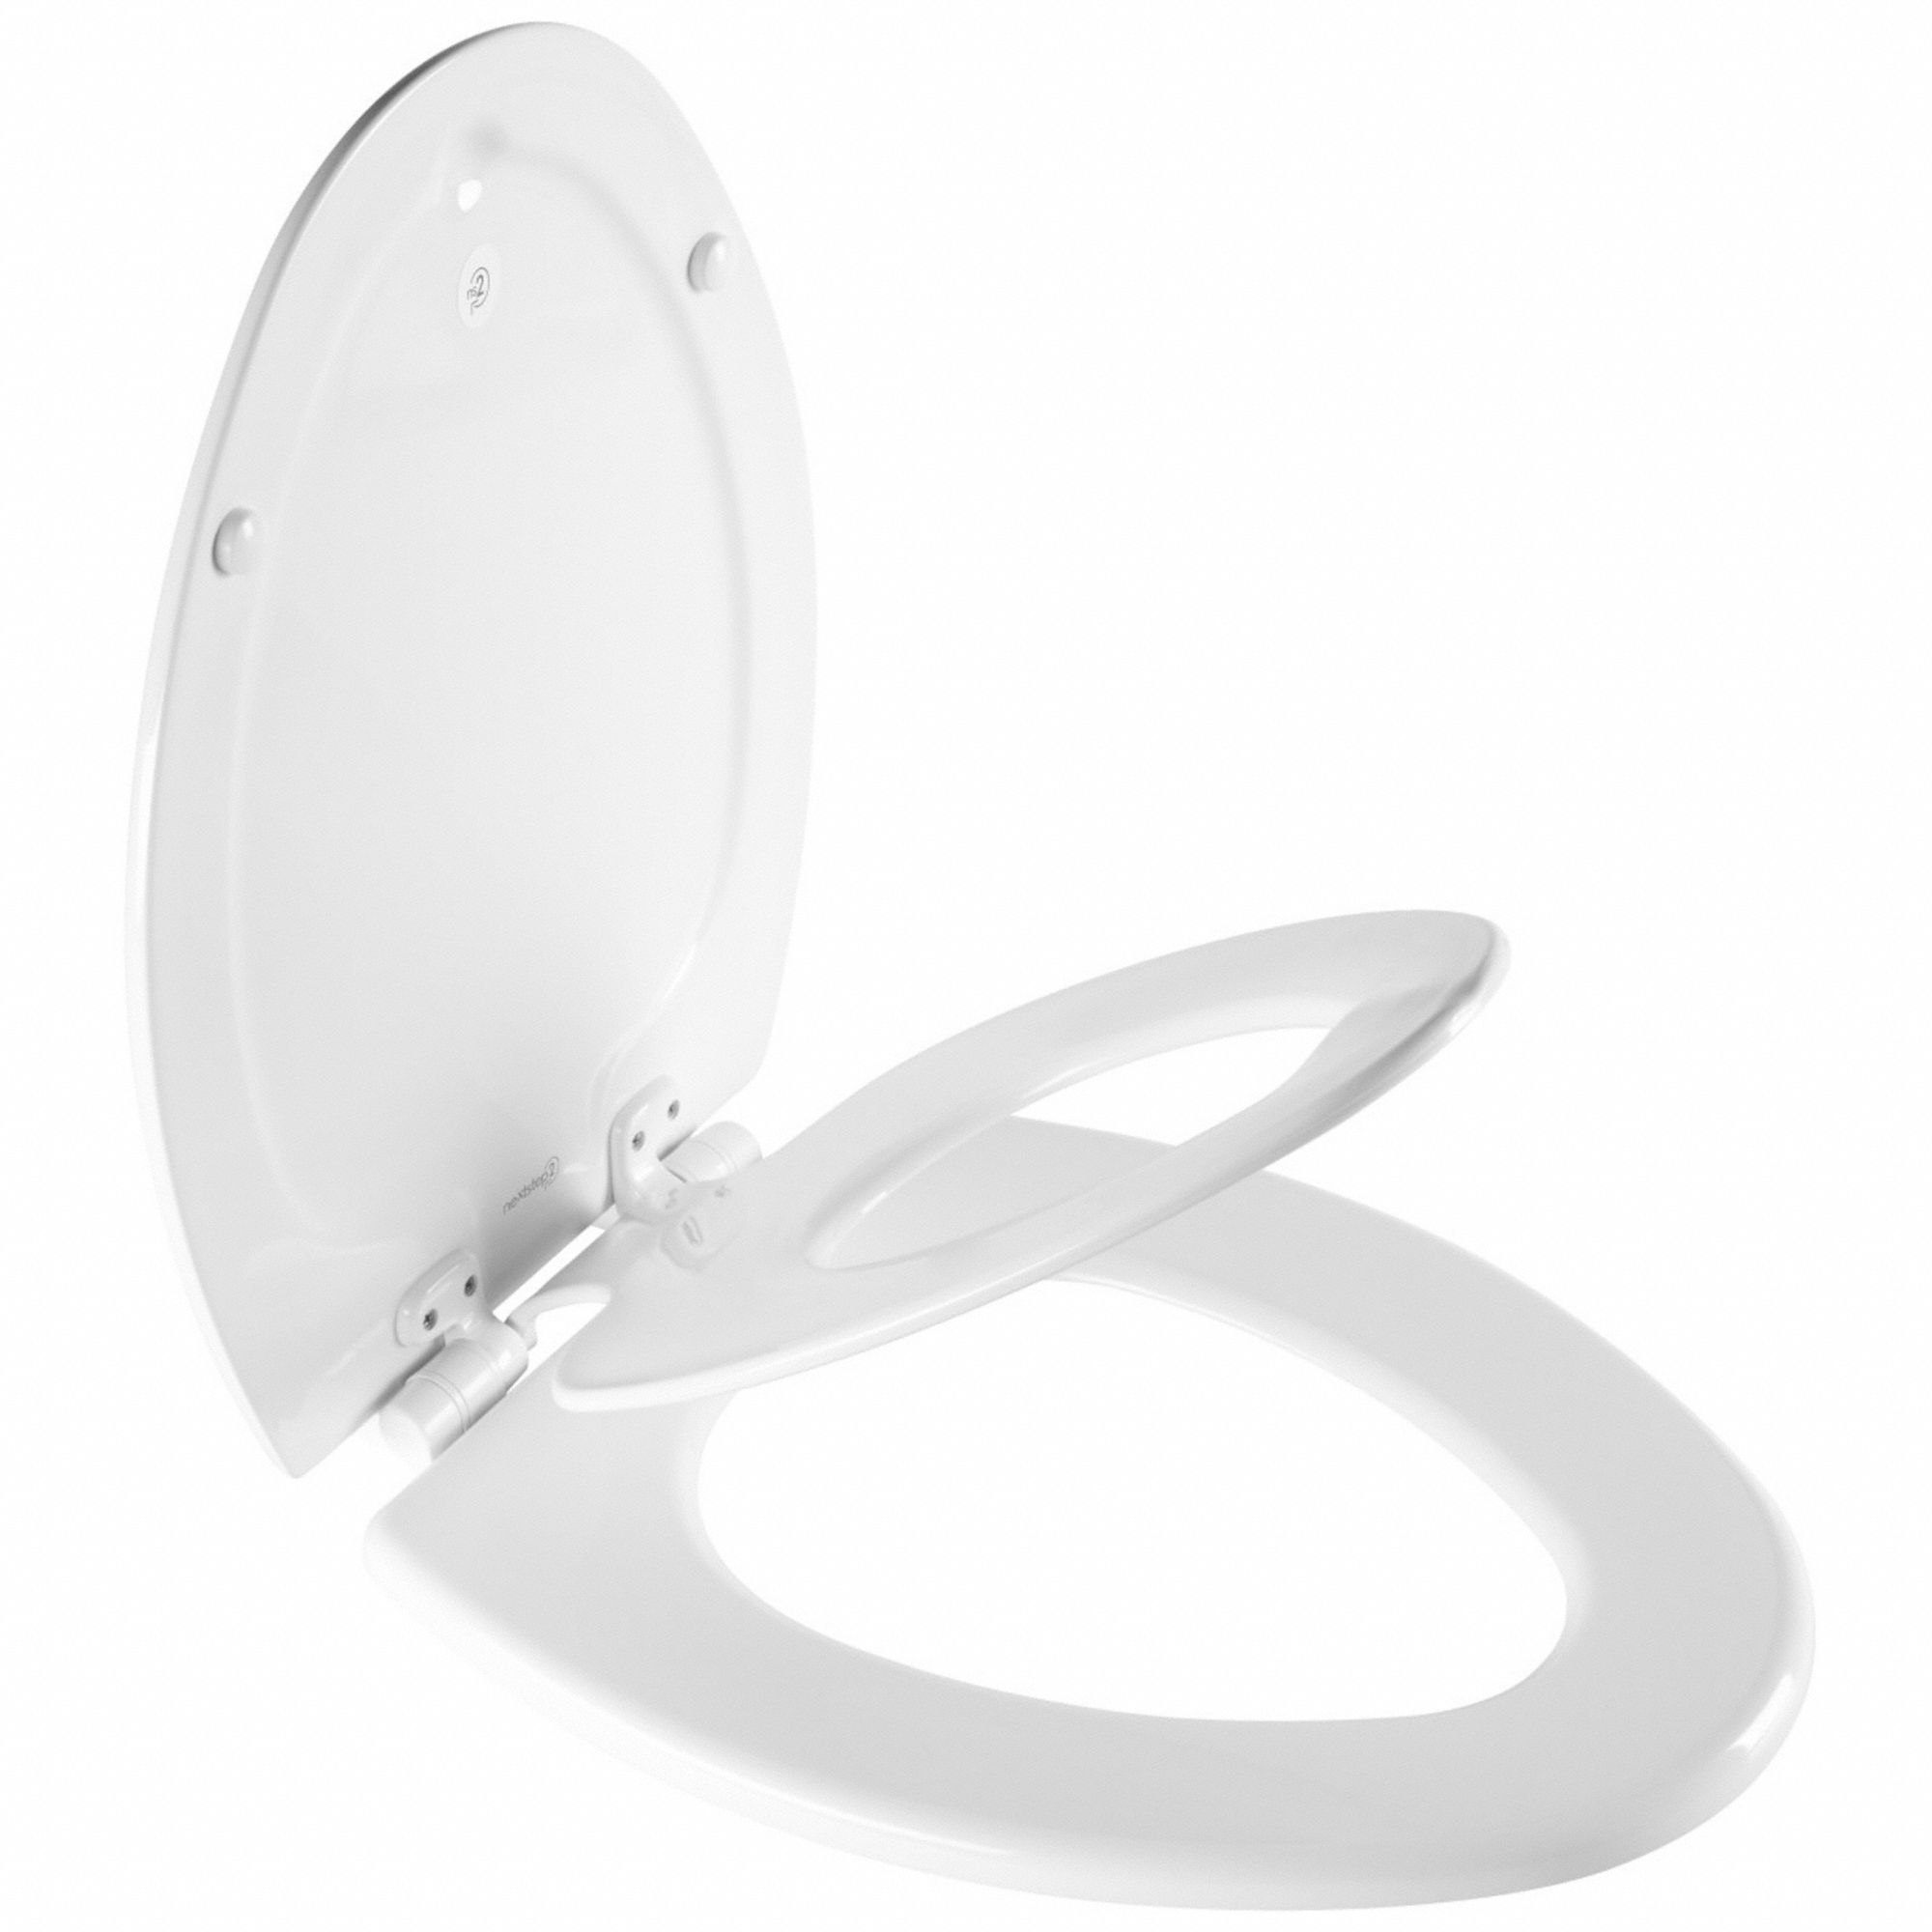 Toilet Seat: White, Plastic with Stainless Steel Posts, Slow Close Hinge, 2 3/16 in Seat Ht, Closed